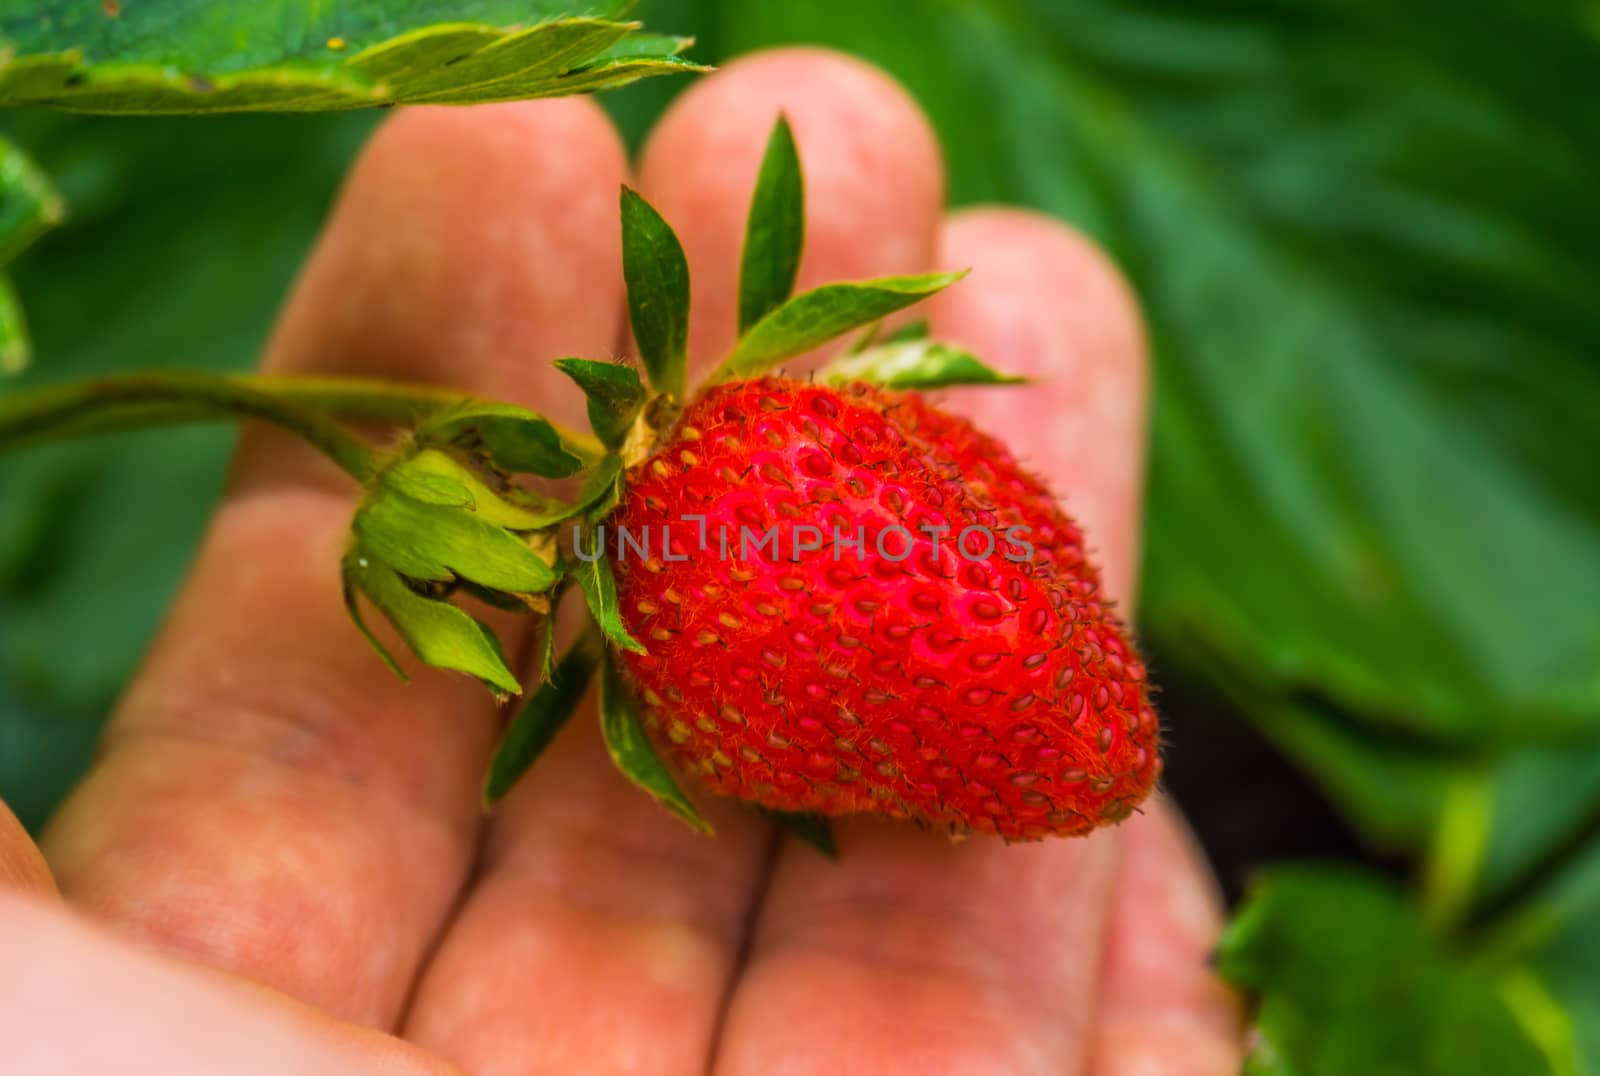 Hand holding a fresh ripe organically grown strawberry, Agriculture and gardening background by charlottebleijenberg